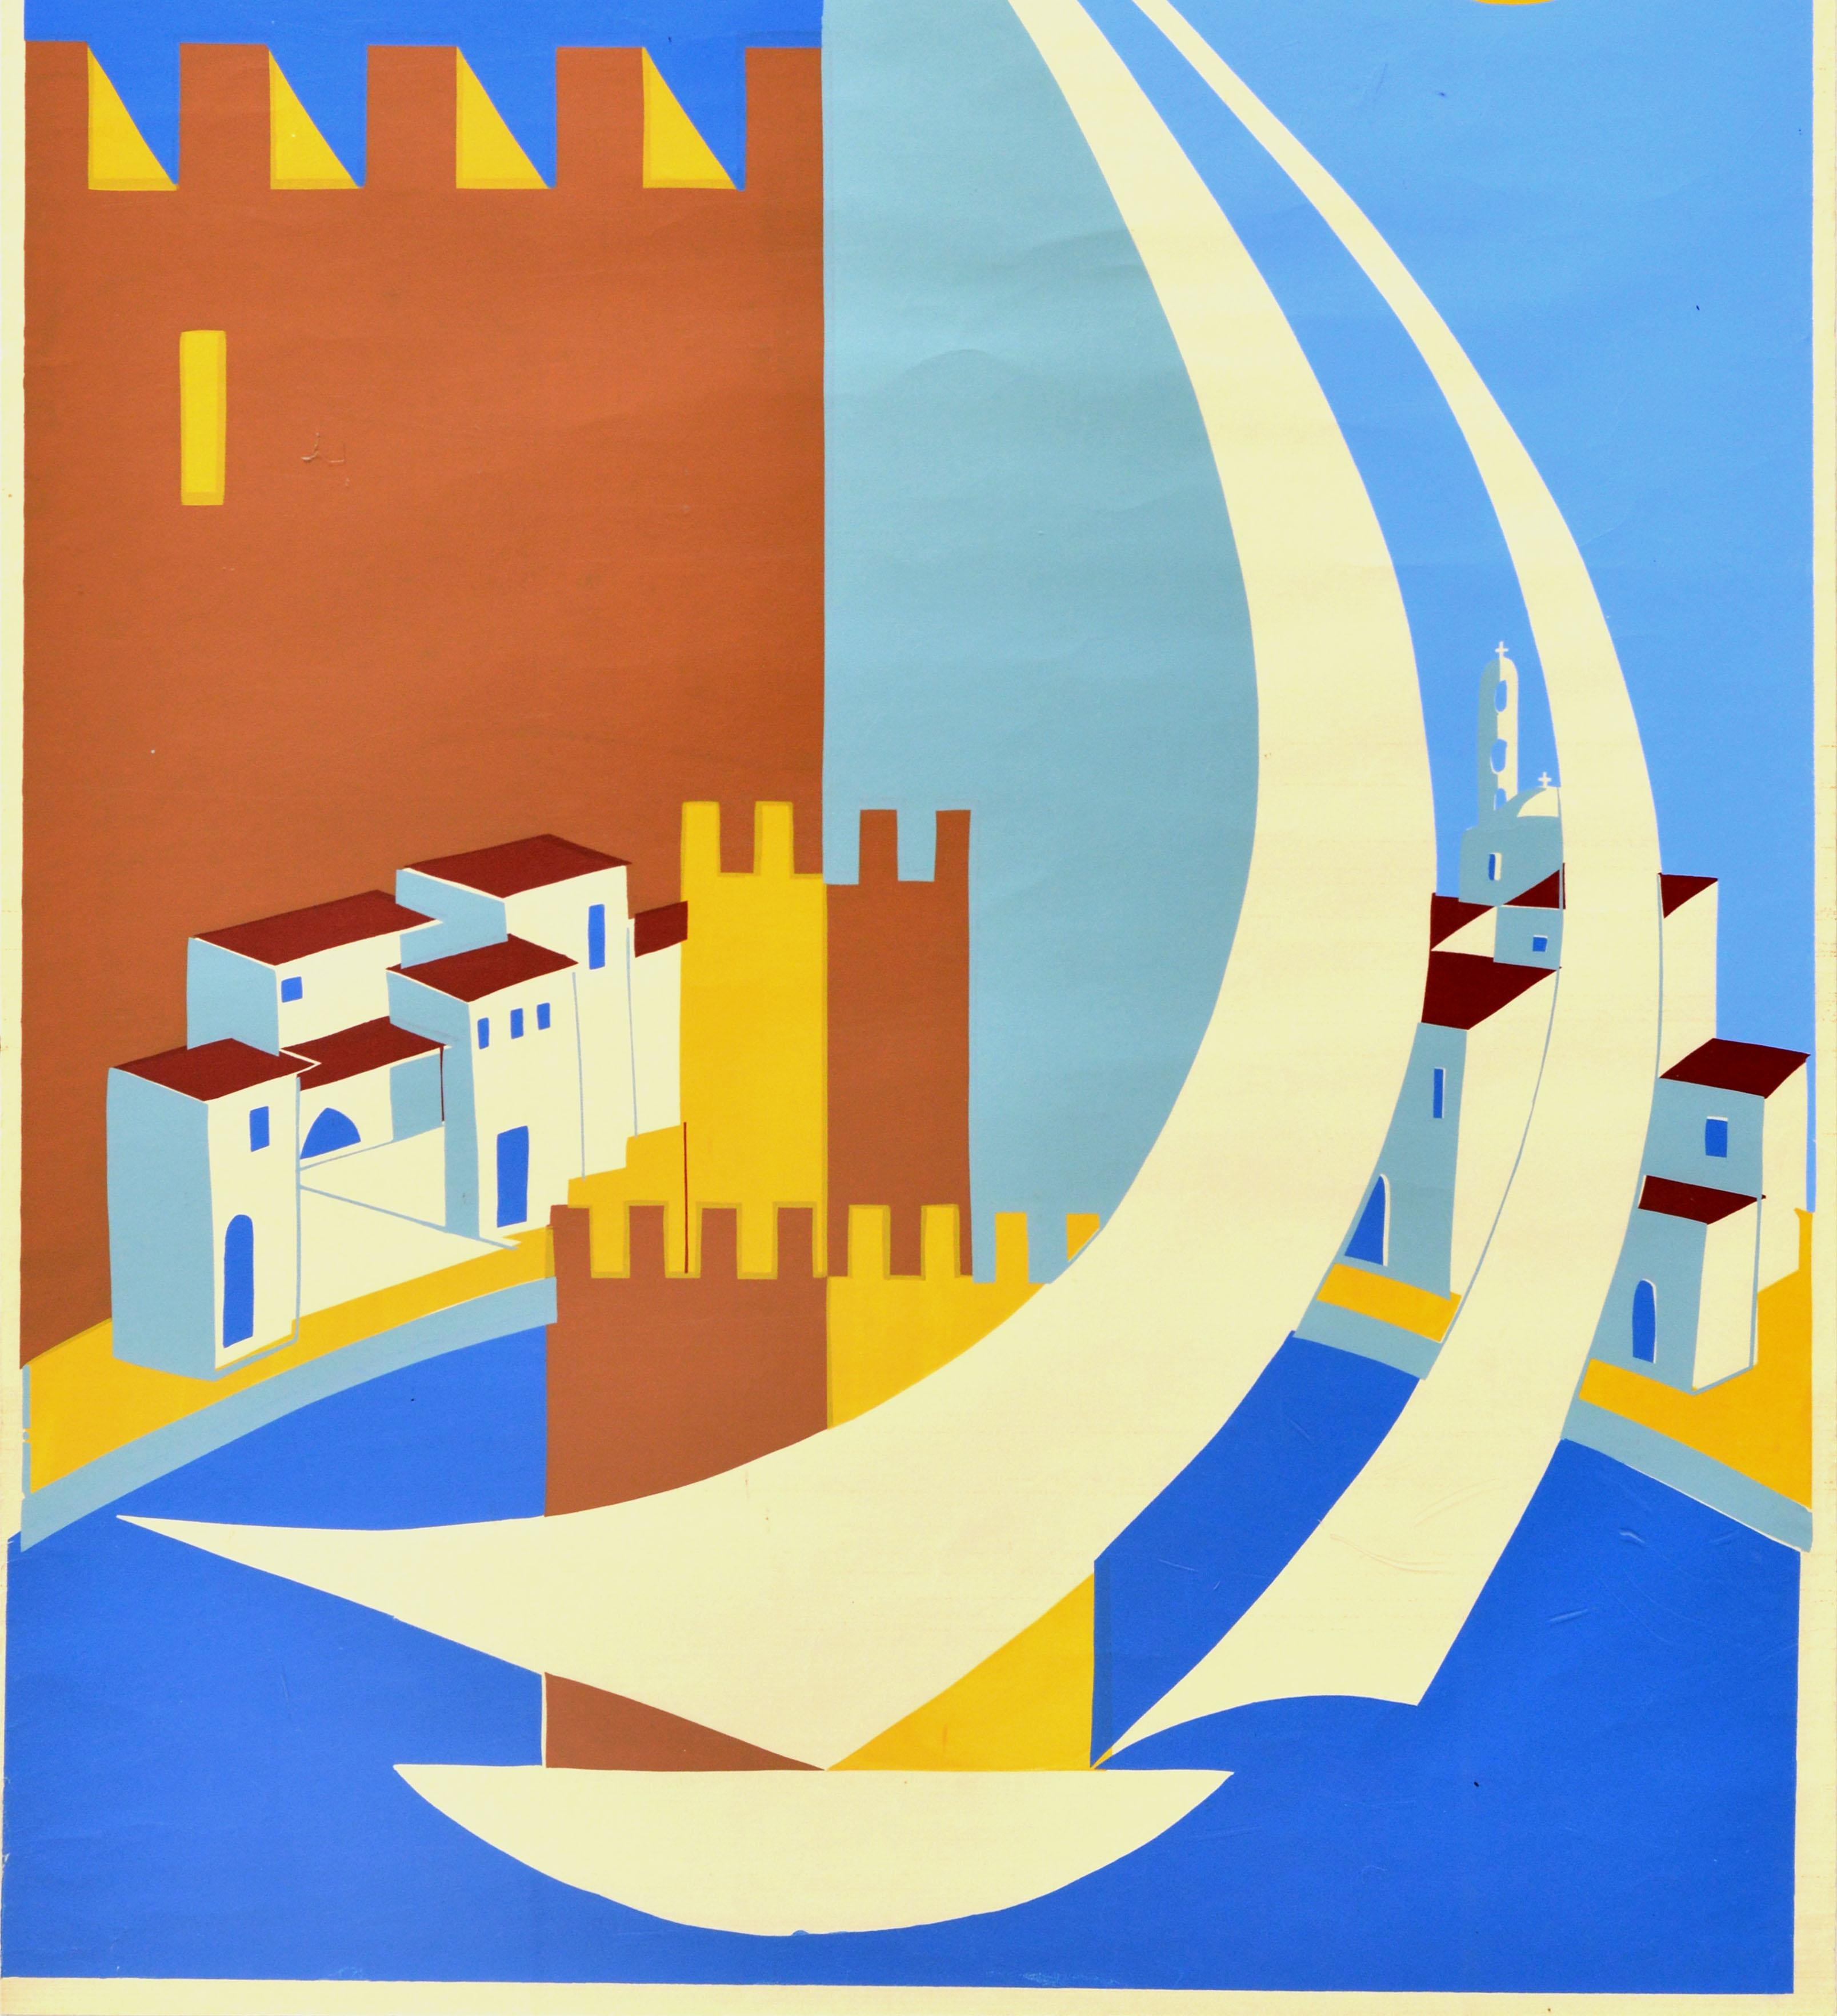 Original vintage travel poster for the island of Cyprus featuring a great silkscreen graphic design depicting historic tourist attractions and sport including a sailing boat in the foreground with castle fort architecture structures, the blue sea